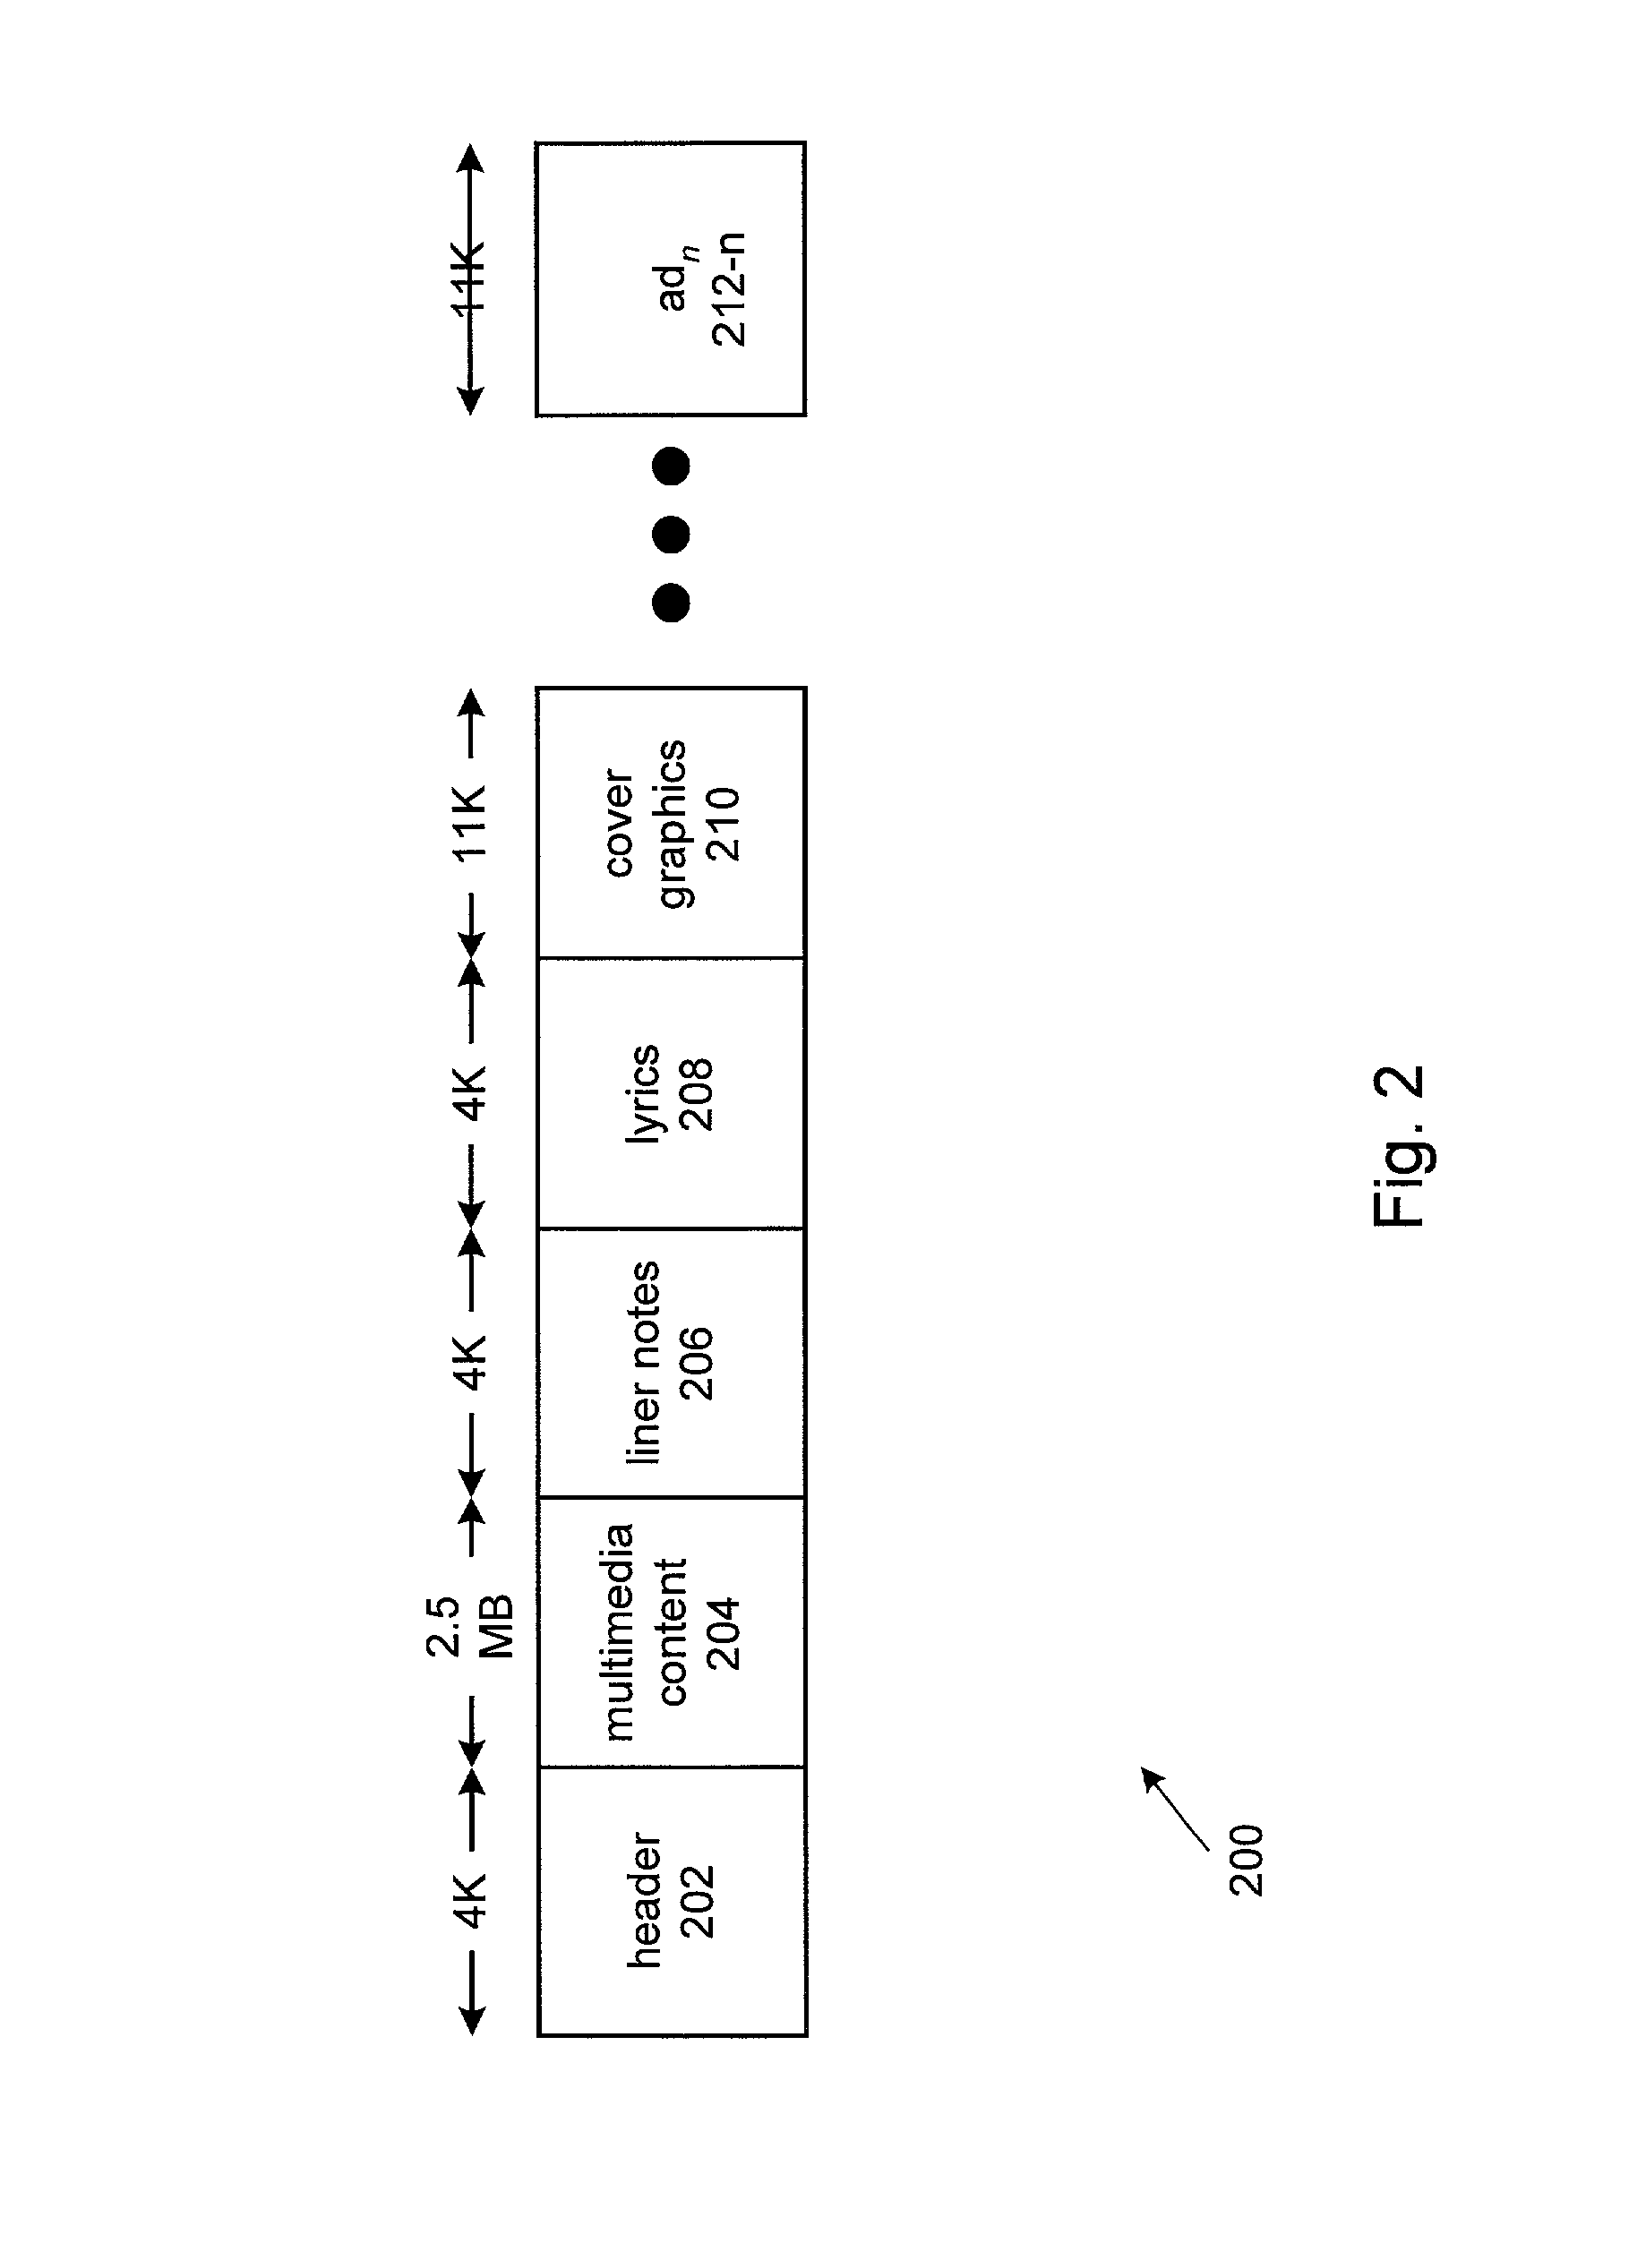 Personal multimedia device and methods of use thereof